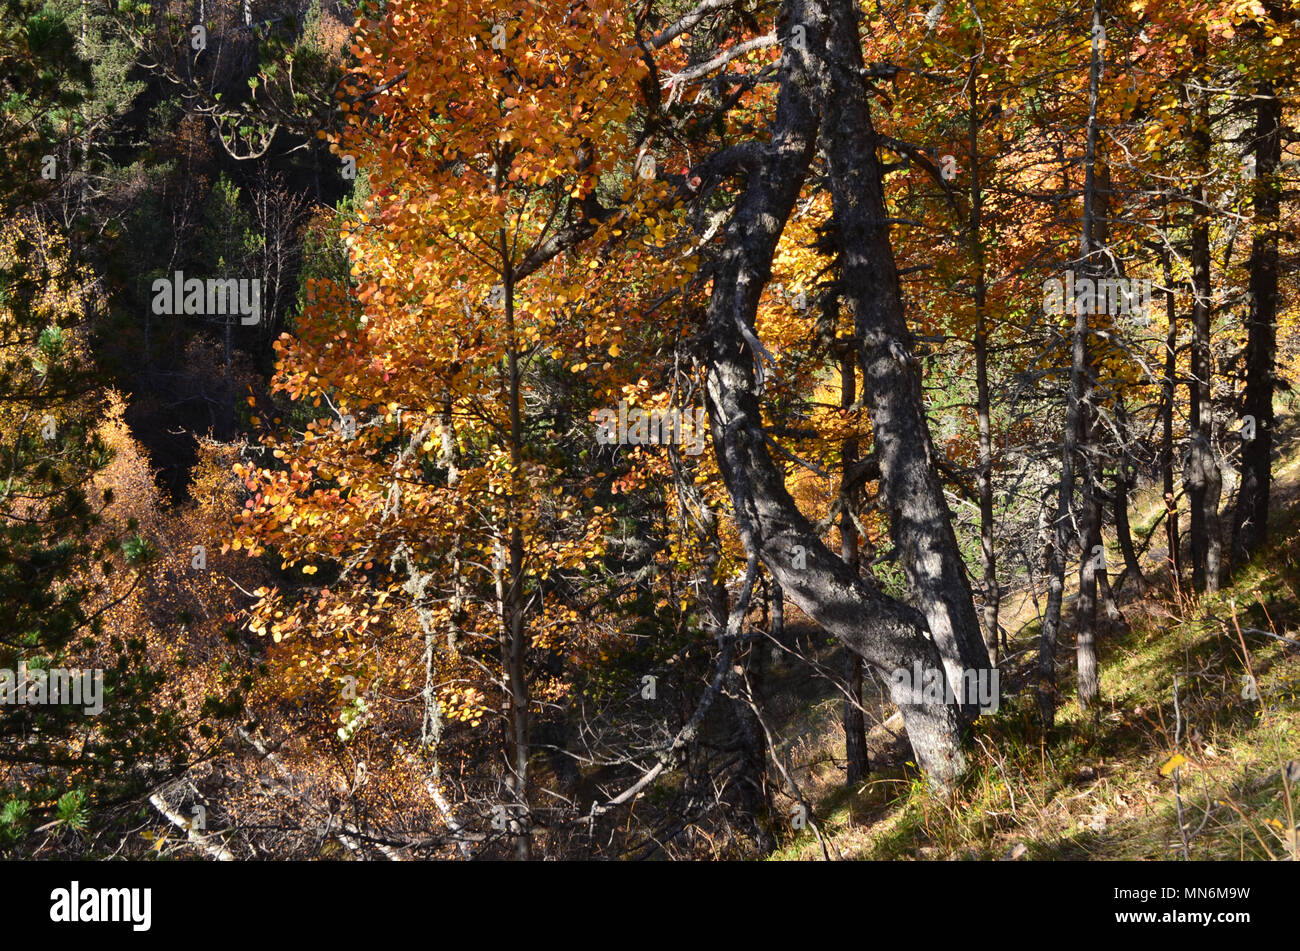 Autumn colors in the mixed forests of Posets-Maladeta Natural Park, Spanish Pyrenees Stock Photo